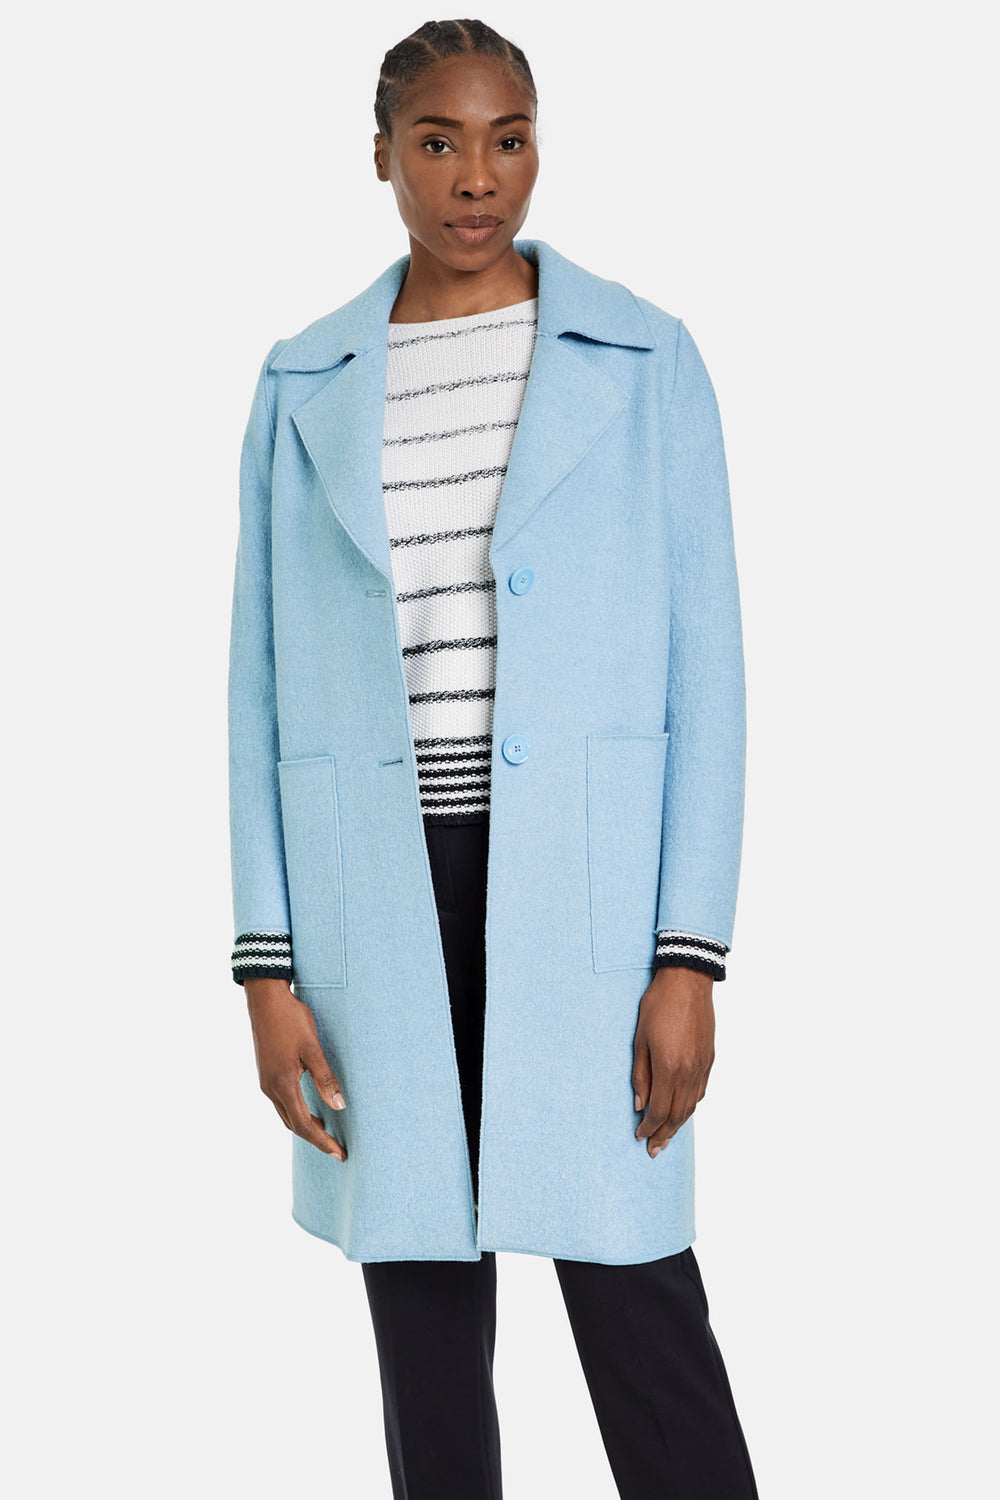 Gerry Weber 350206 80580 Sky Blue Wool Style Coat - Experience Boutique